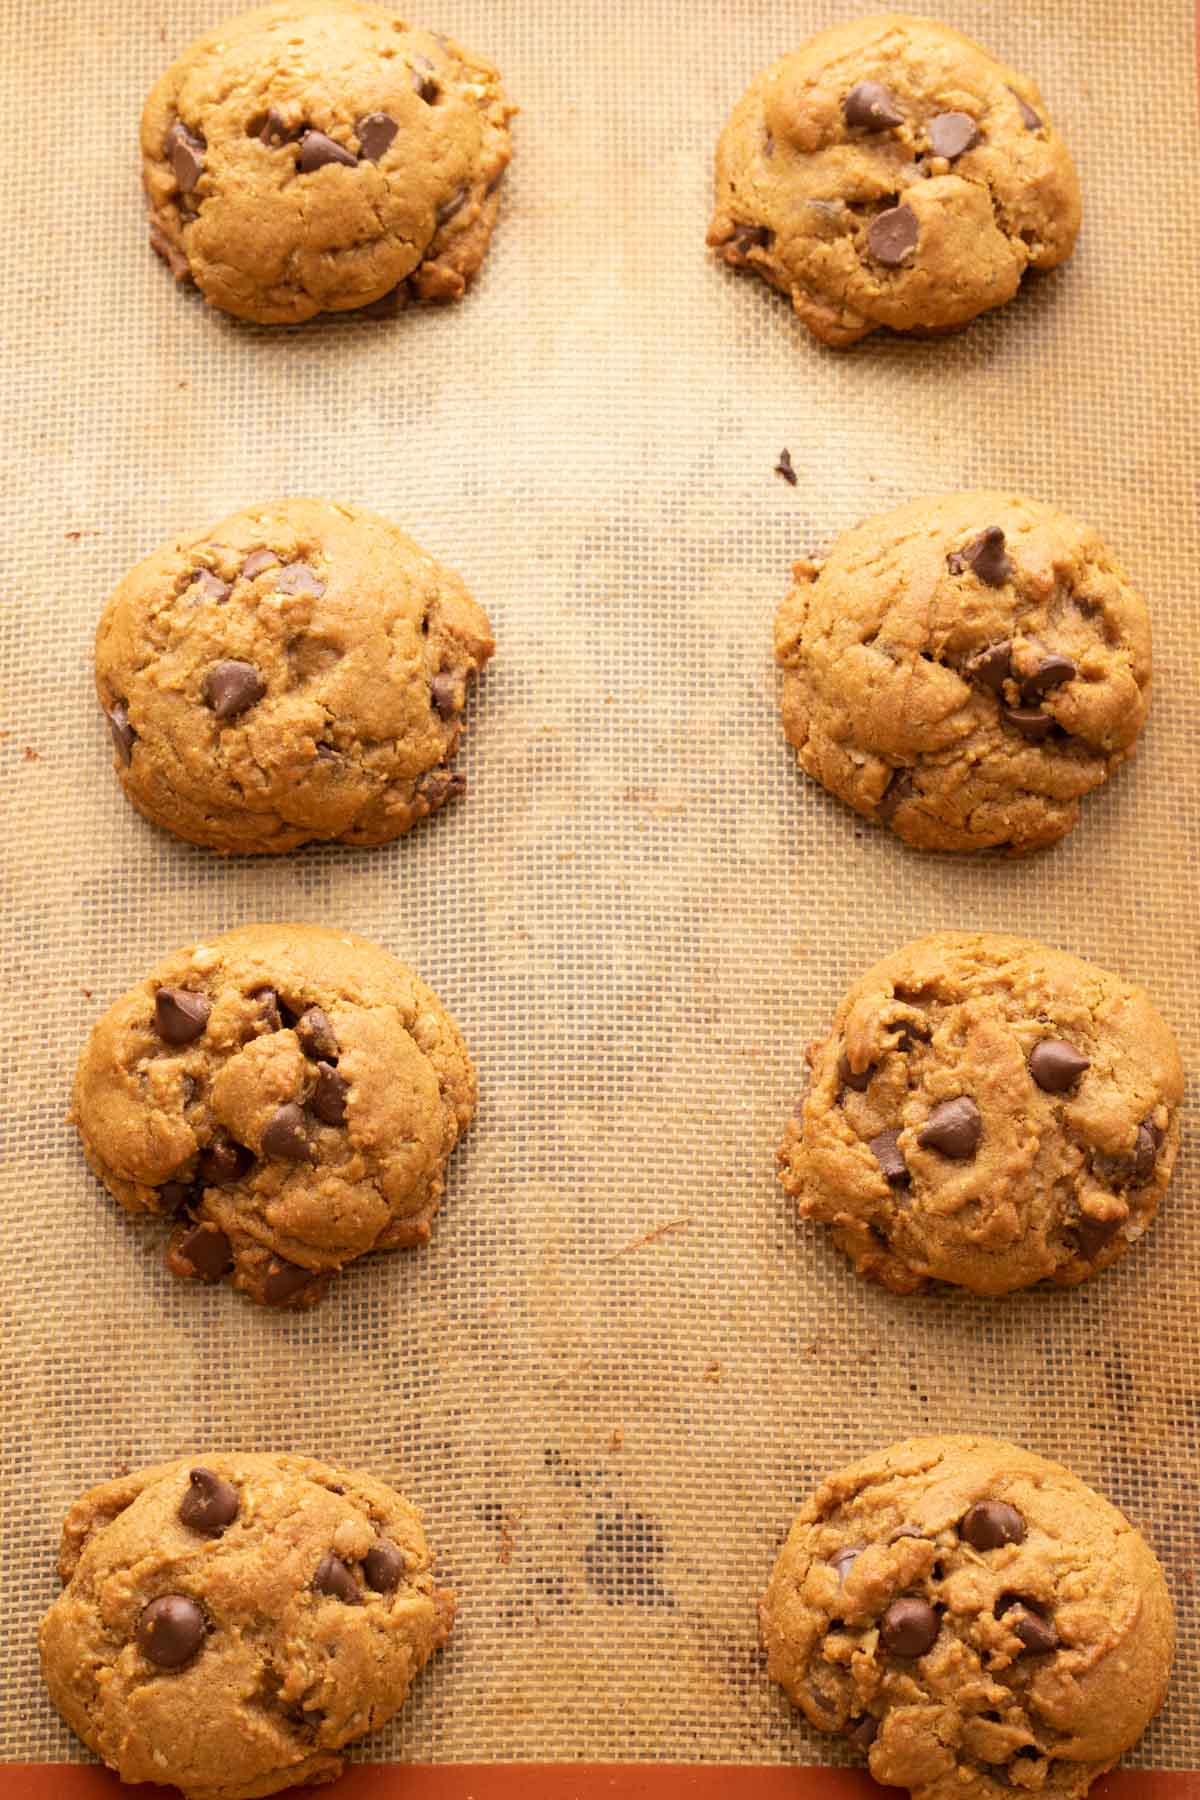 Oatmeal molasses chocolate chip cookies on a sheet pan